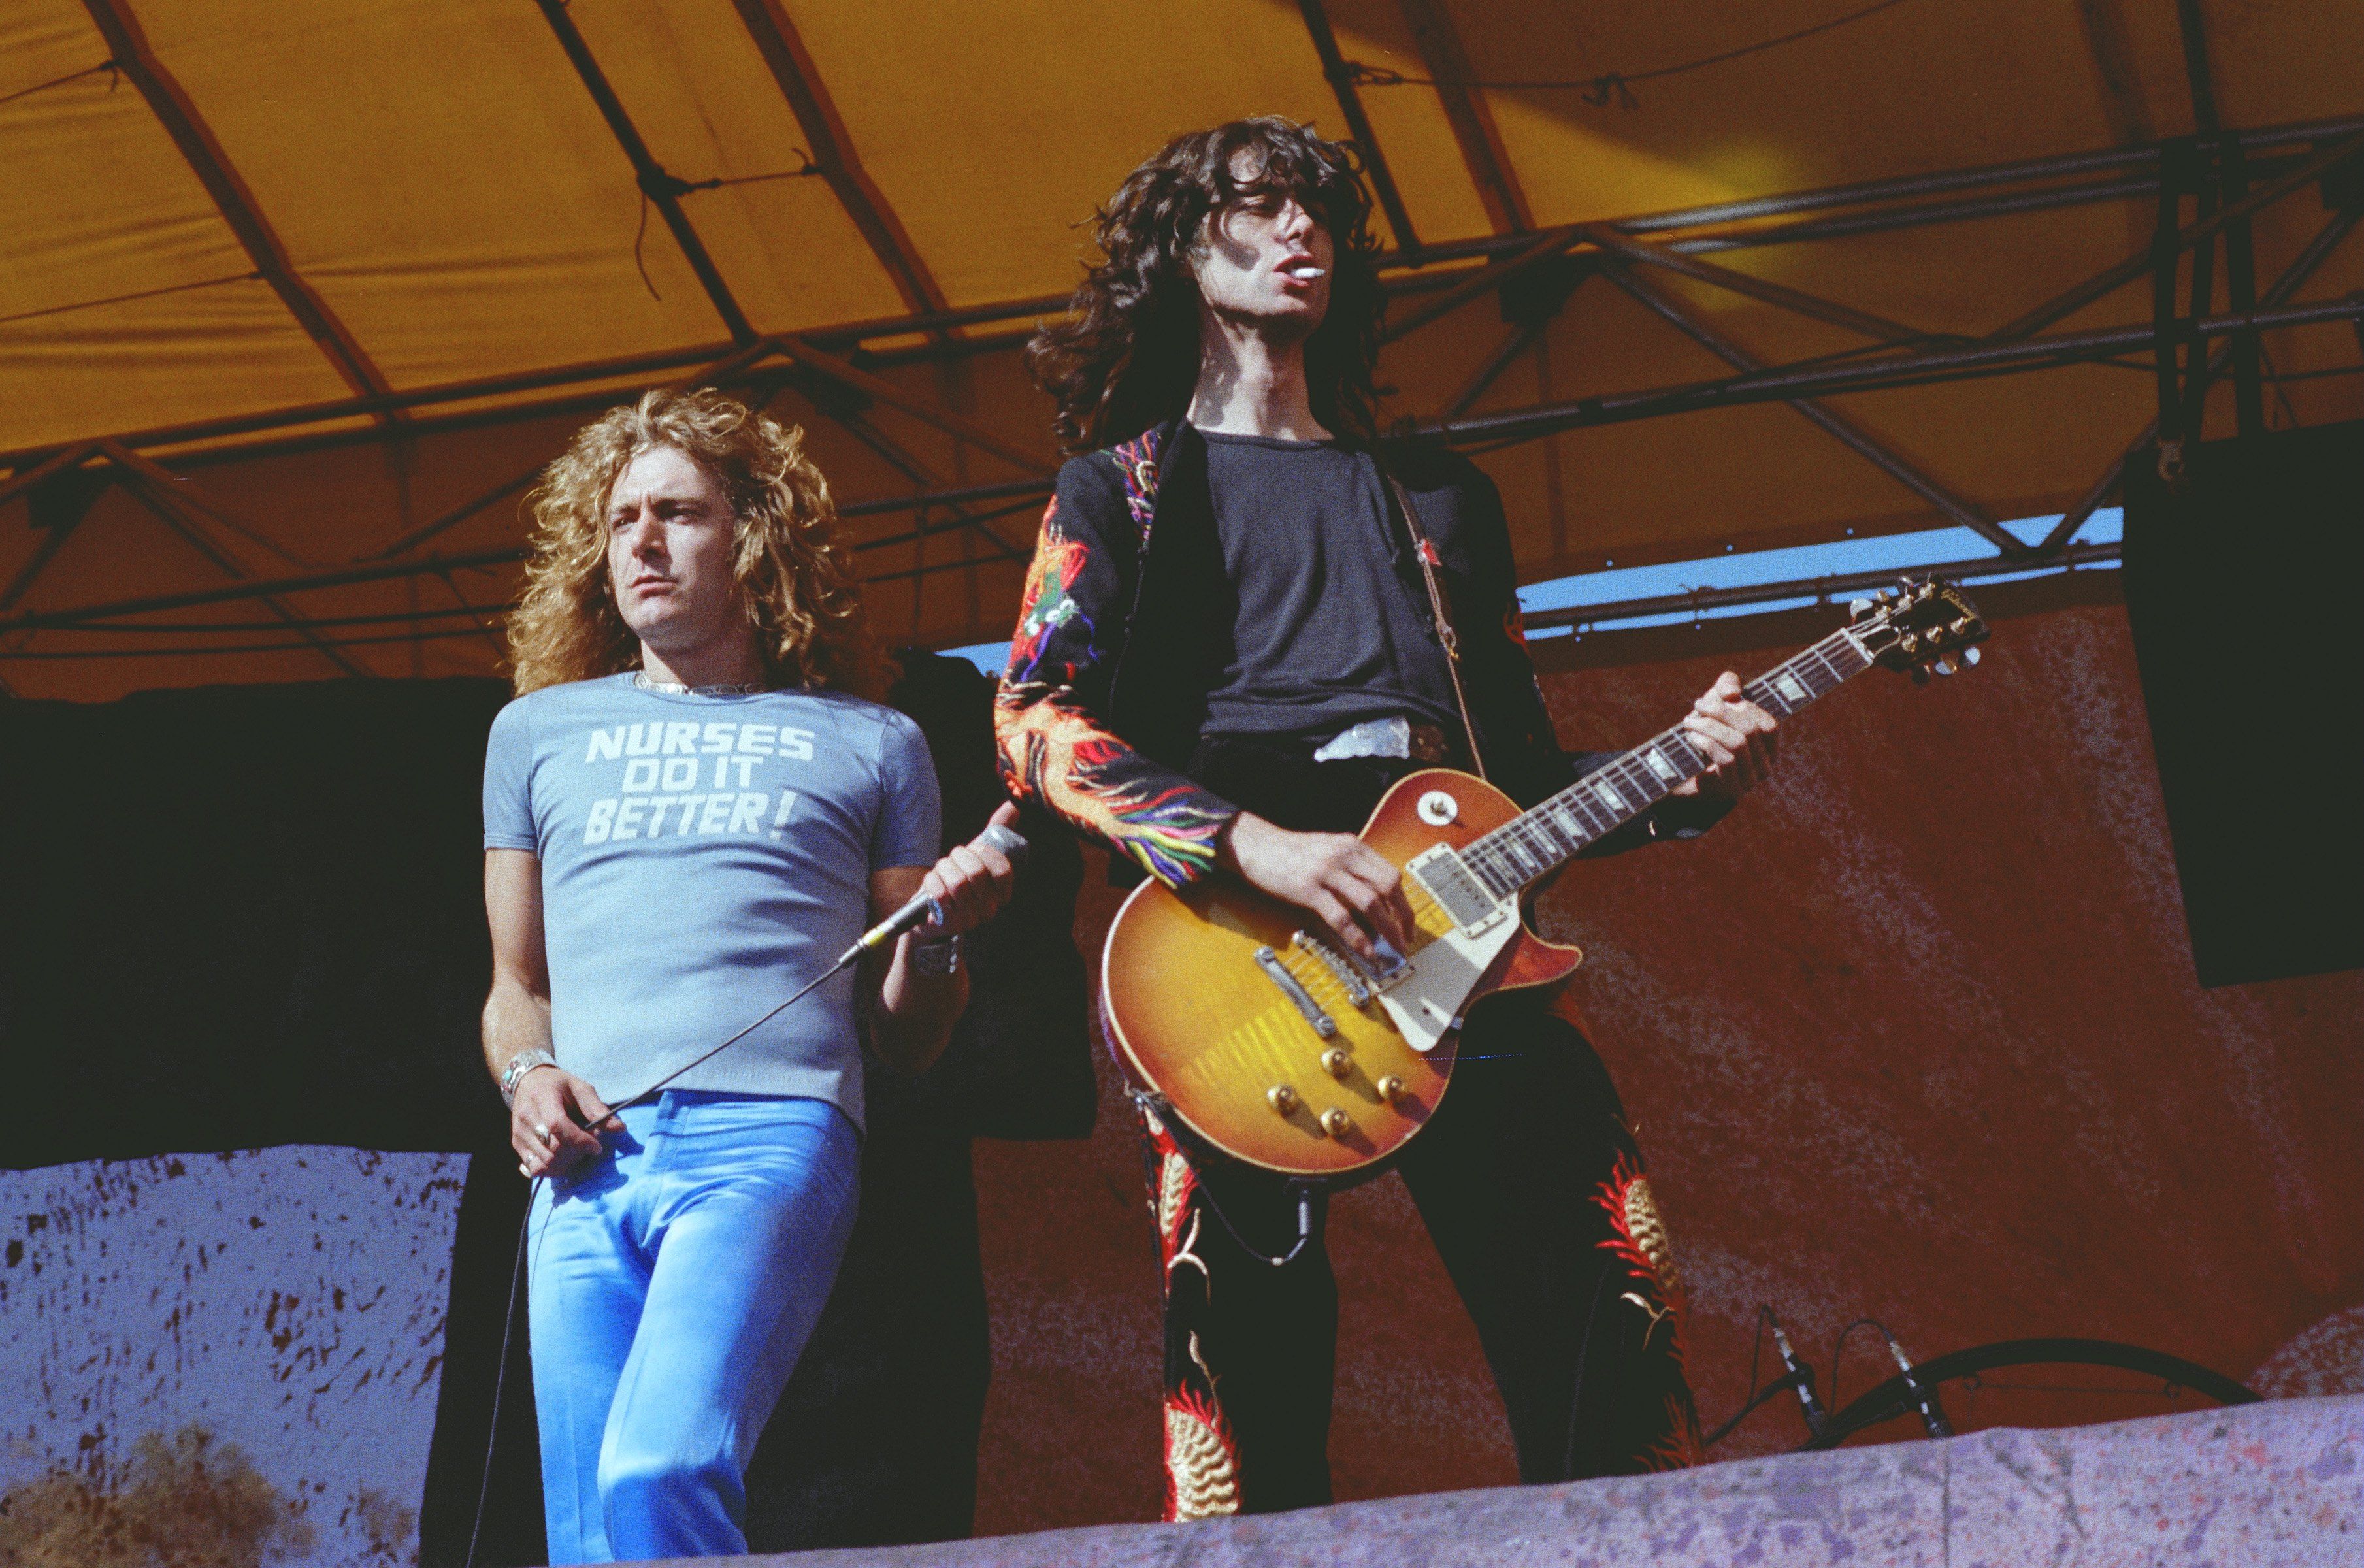 Robert Plant and Jimmy Page on stage together with Led Zeppelin.